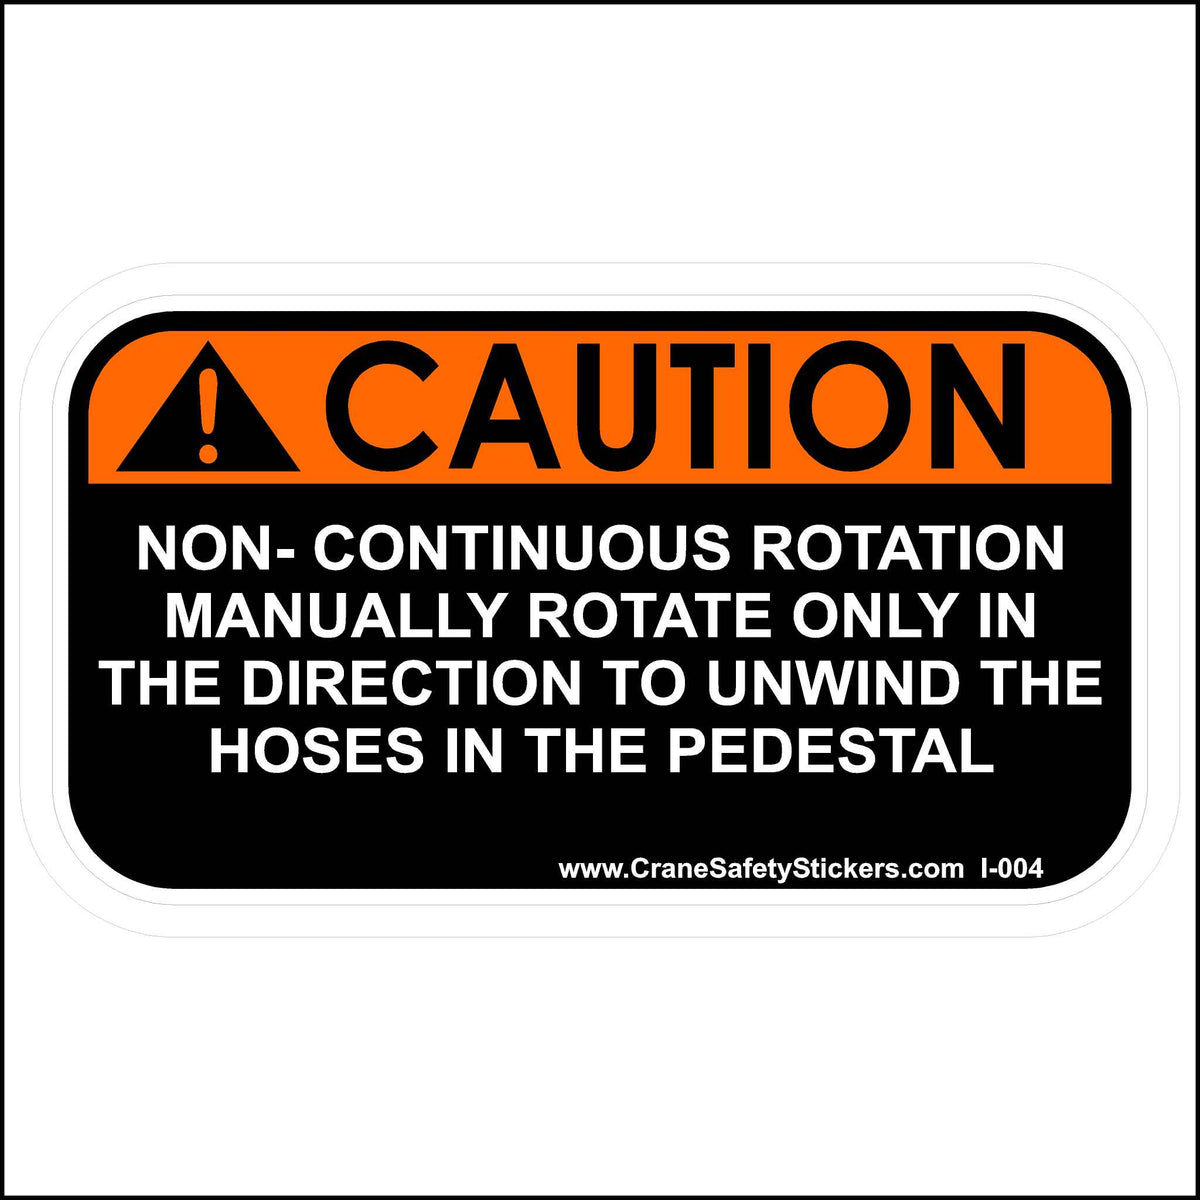 non-continuous rotation safety sticker printed with.  CAUTION.  NON-CONTINUOUS ROTATION MANUALLY ROTATE ONLY IN THE DIRECTION TO UNWIND THE HOSES IN THE PEDESTAL.